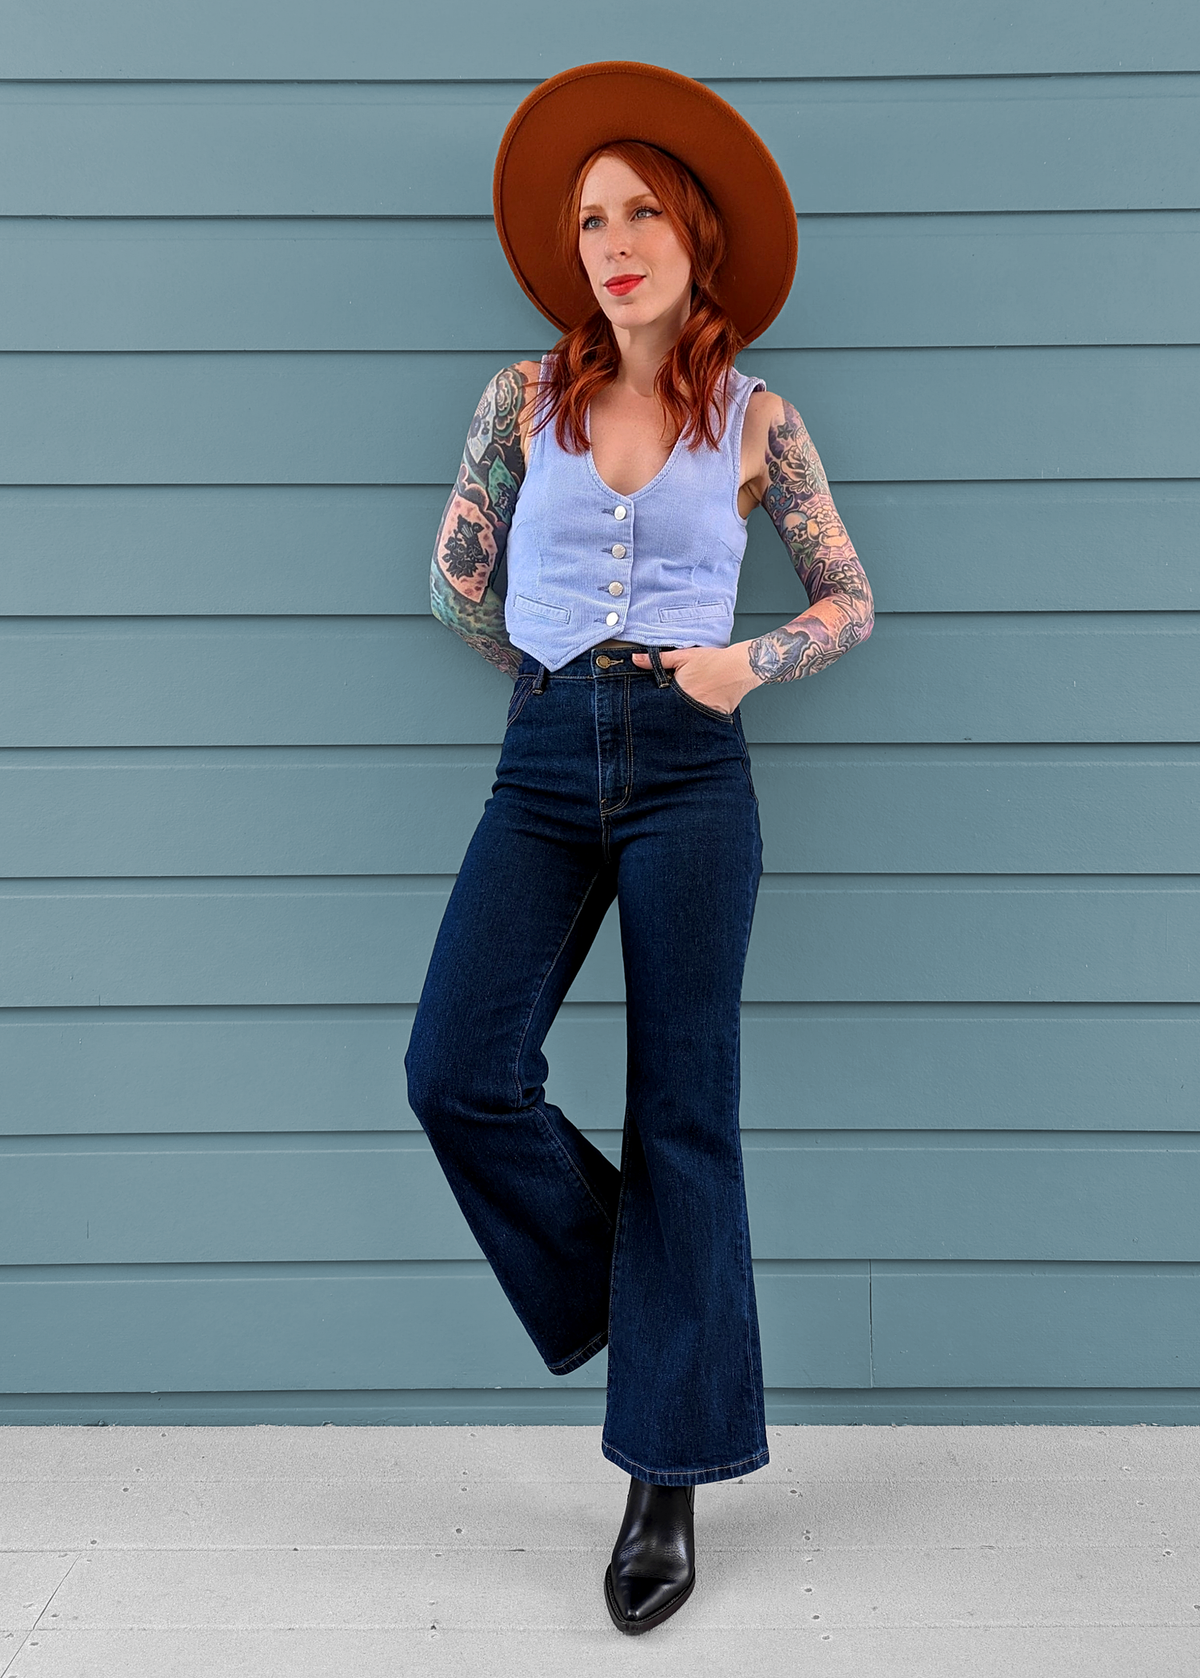 Rolla's Jeans Ankle Crop Eastcoast Denim Flares in Lux Blue: 70s inspired with a high rise waist, cropped ankle length kick flare leg, and a dark blue denim wash. Made of organic cotton denim.